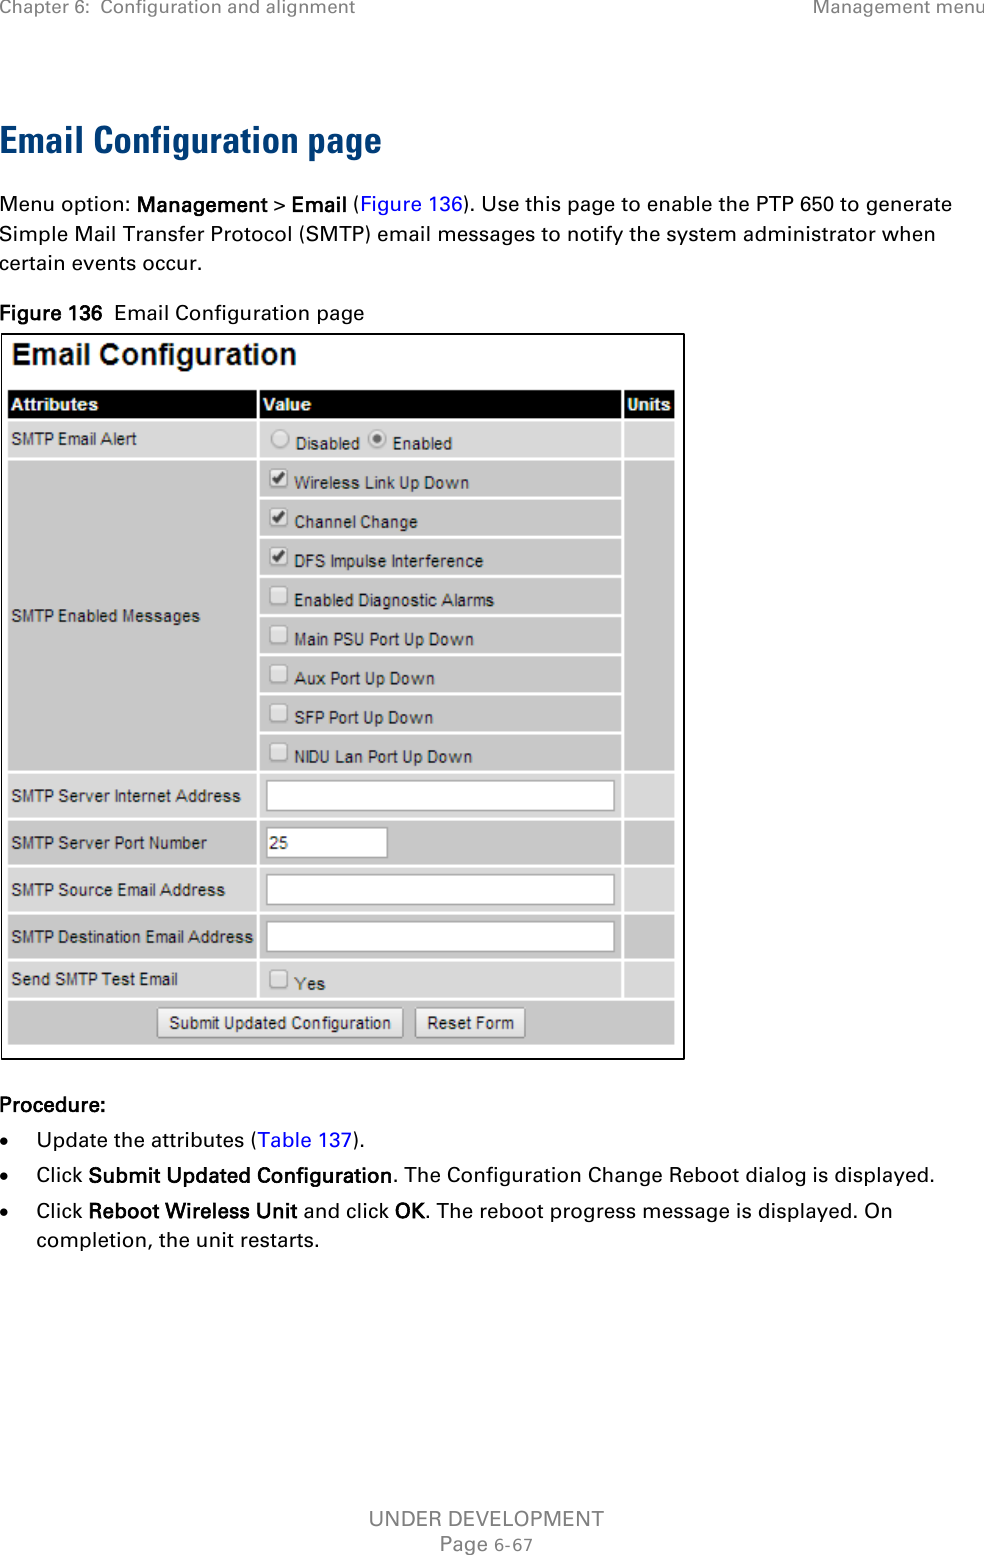 Chapter 6:  Configuration and alignment Management menu  Email Configuration page Menu option: Management &gt; Email (Figure 136). Use this page to enable the PTP 650 to generate Simple Mail Transfer Protocol (SMTP) email messages to notify the system administrator when certain events occur. Figure 136  Email Configuration page  Procedure: • Update the attributes (Table 137). • Click Submit Updated Configuration. The Configuration Change Reboot dialog is displayed. • Click Reboot Wireless Unit and click OK. The reboot progress message is displayed. On completion, the unit restarts.    UNDER DEVELOPMENT Page 6-67 